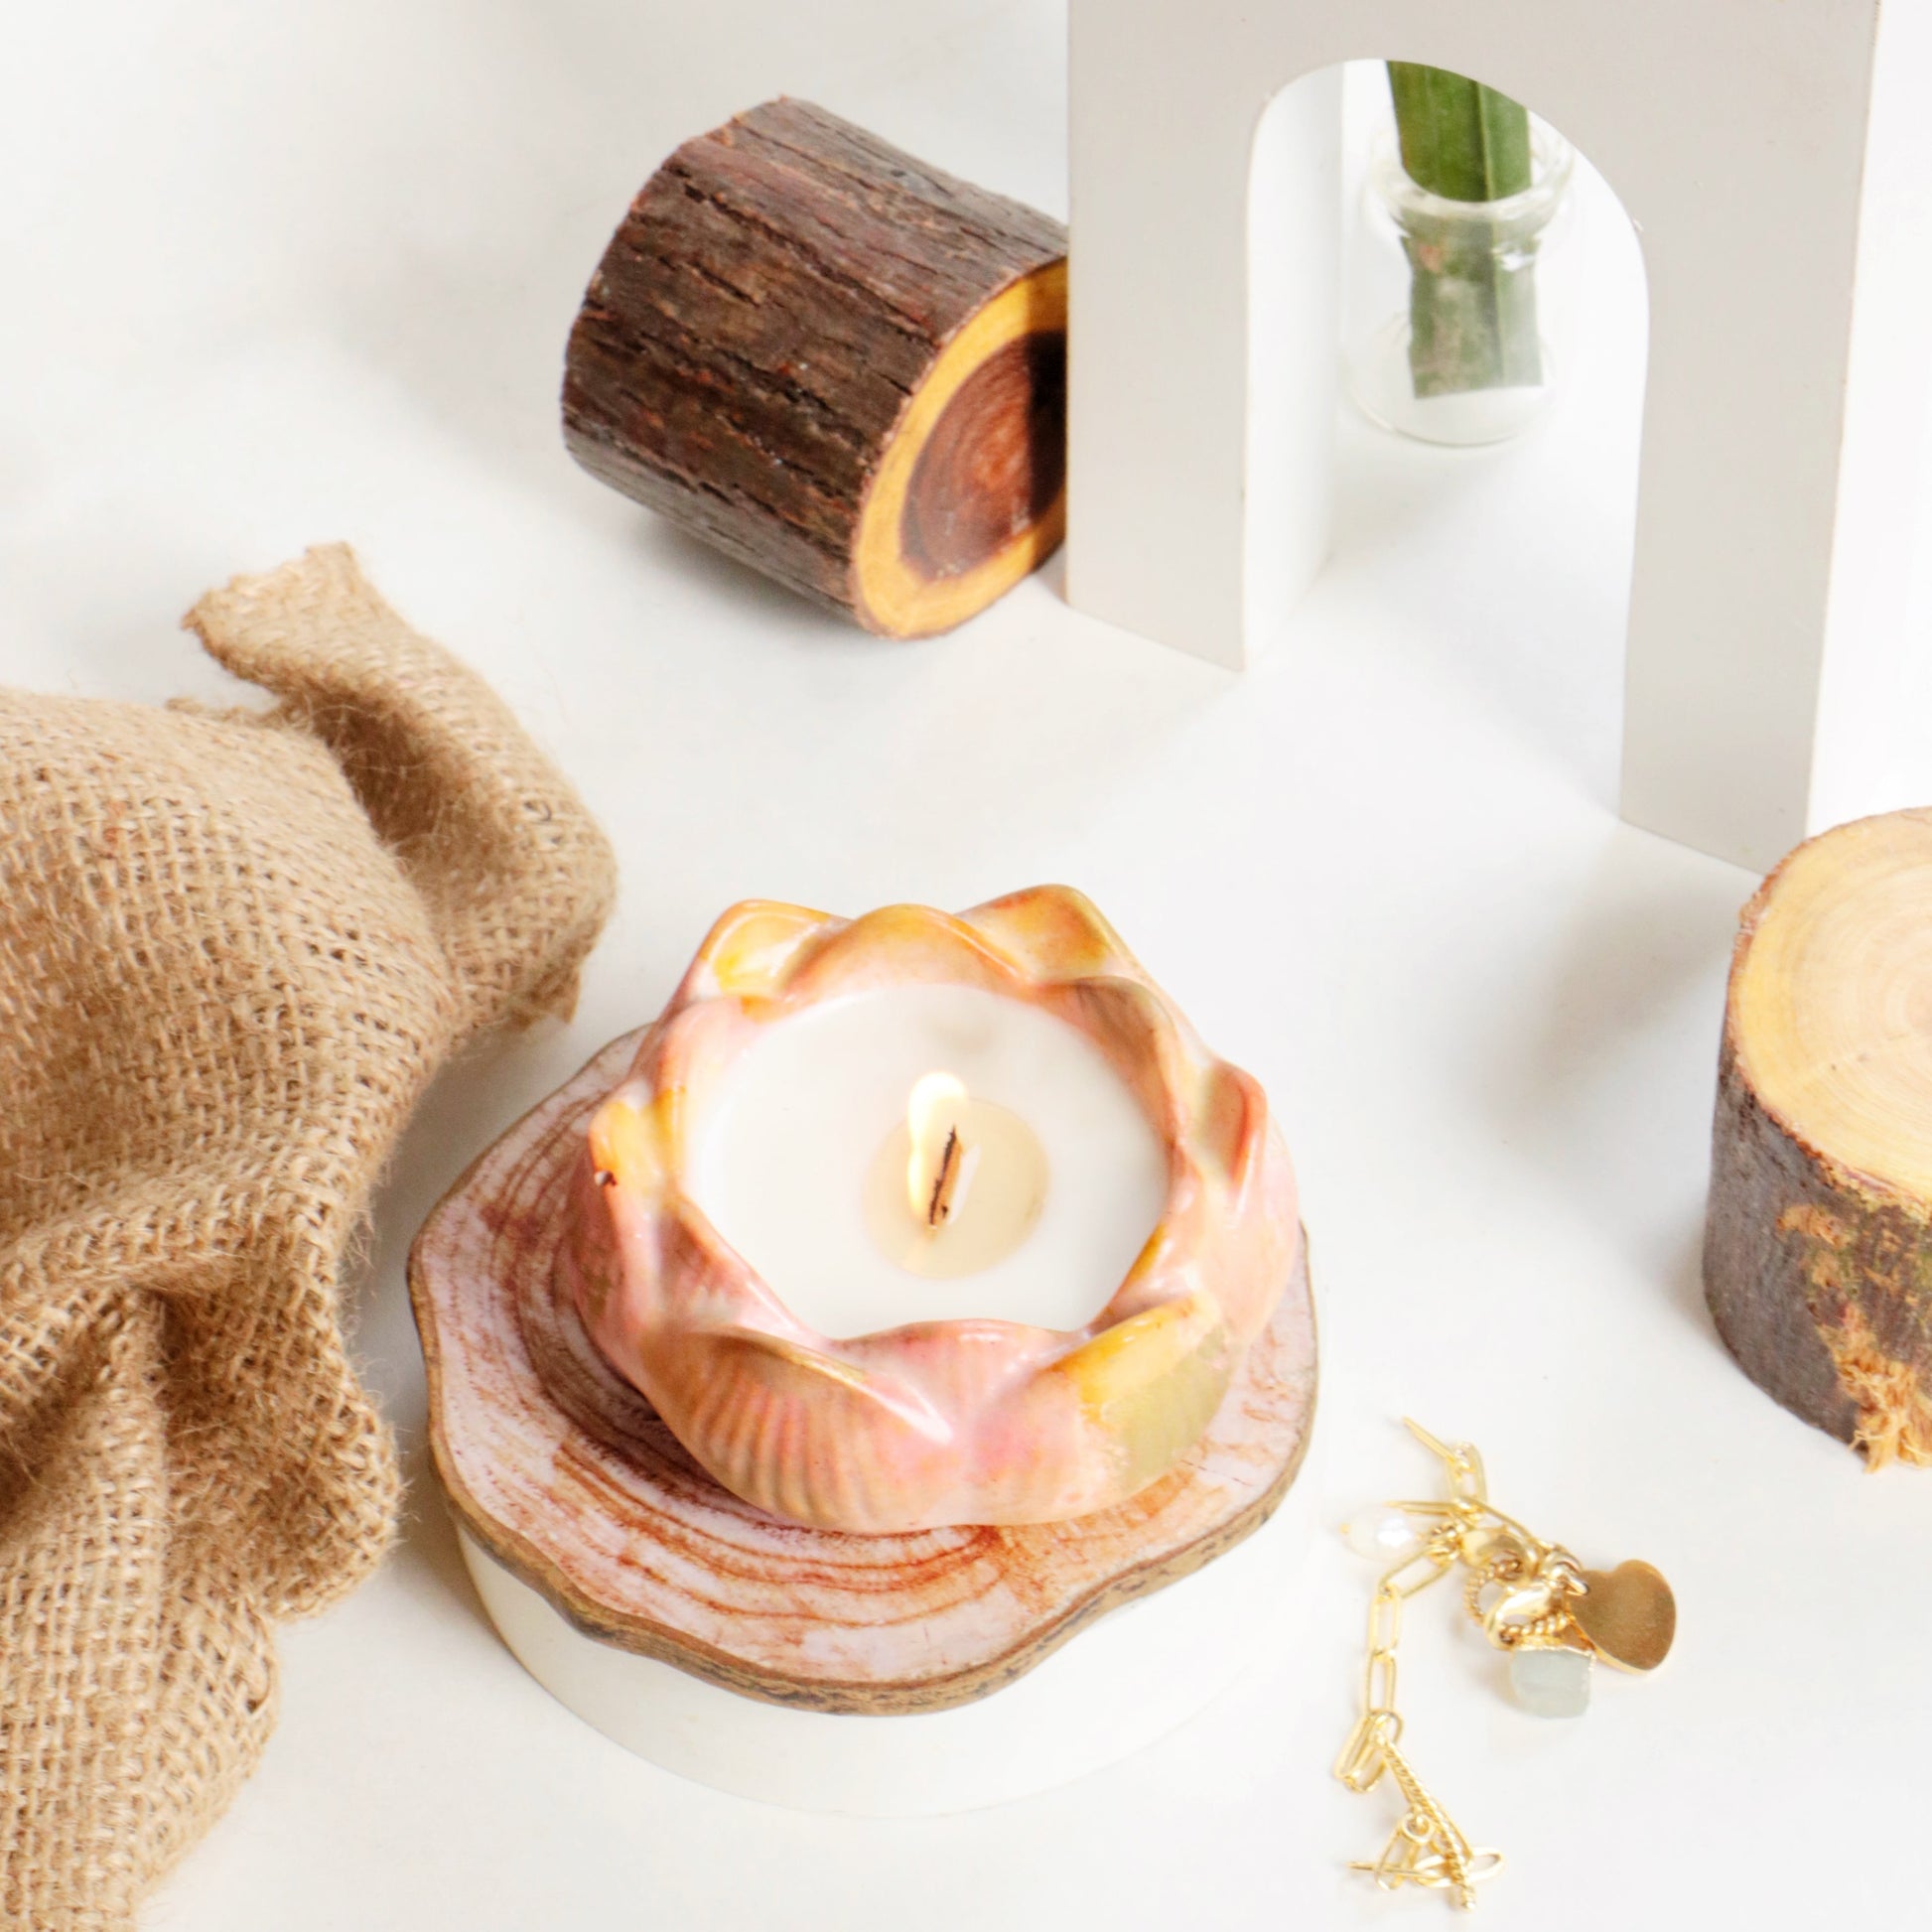 Aromatic candle burning on a table, creating a relaxing atmosphere